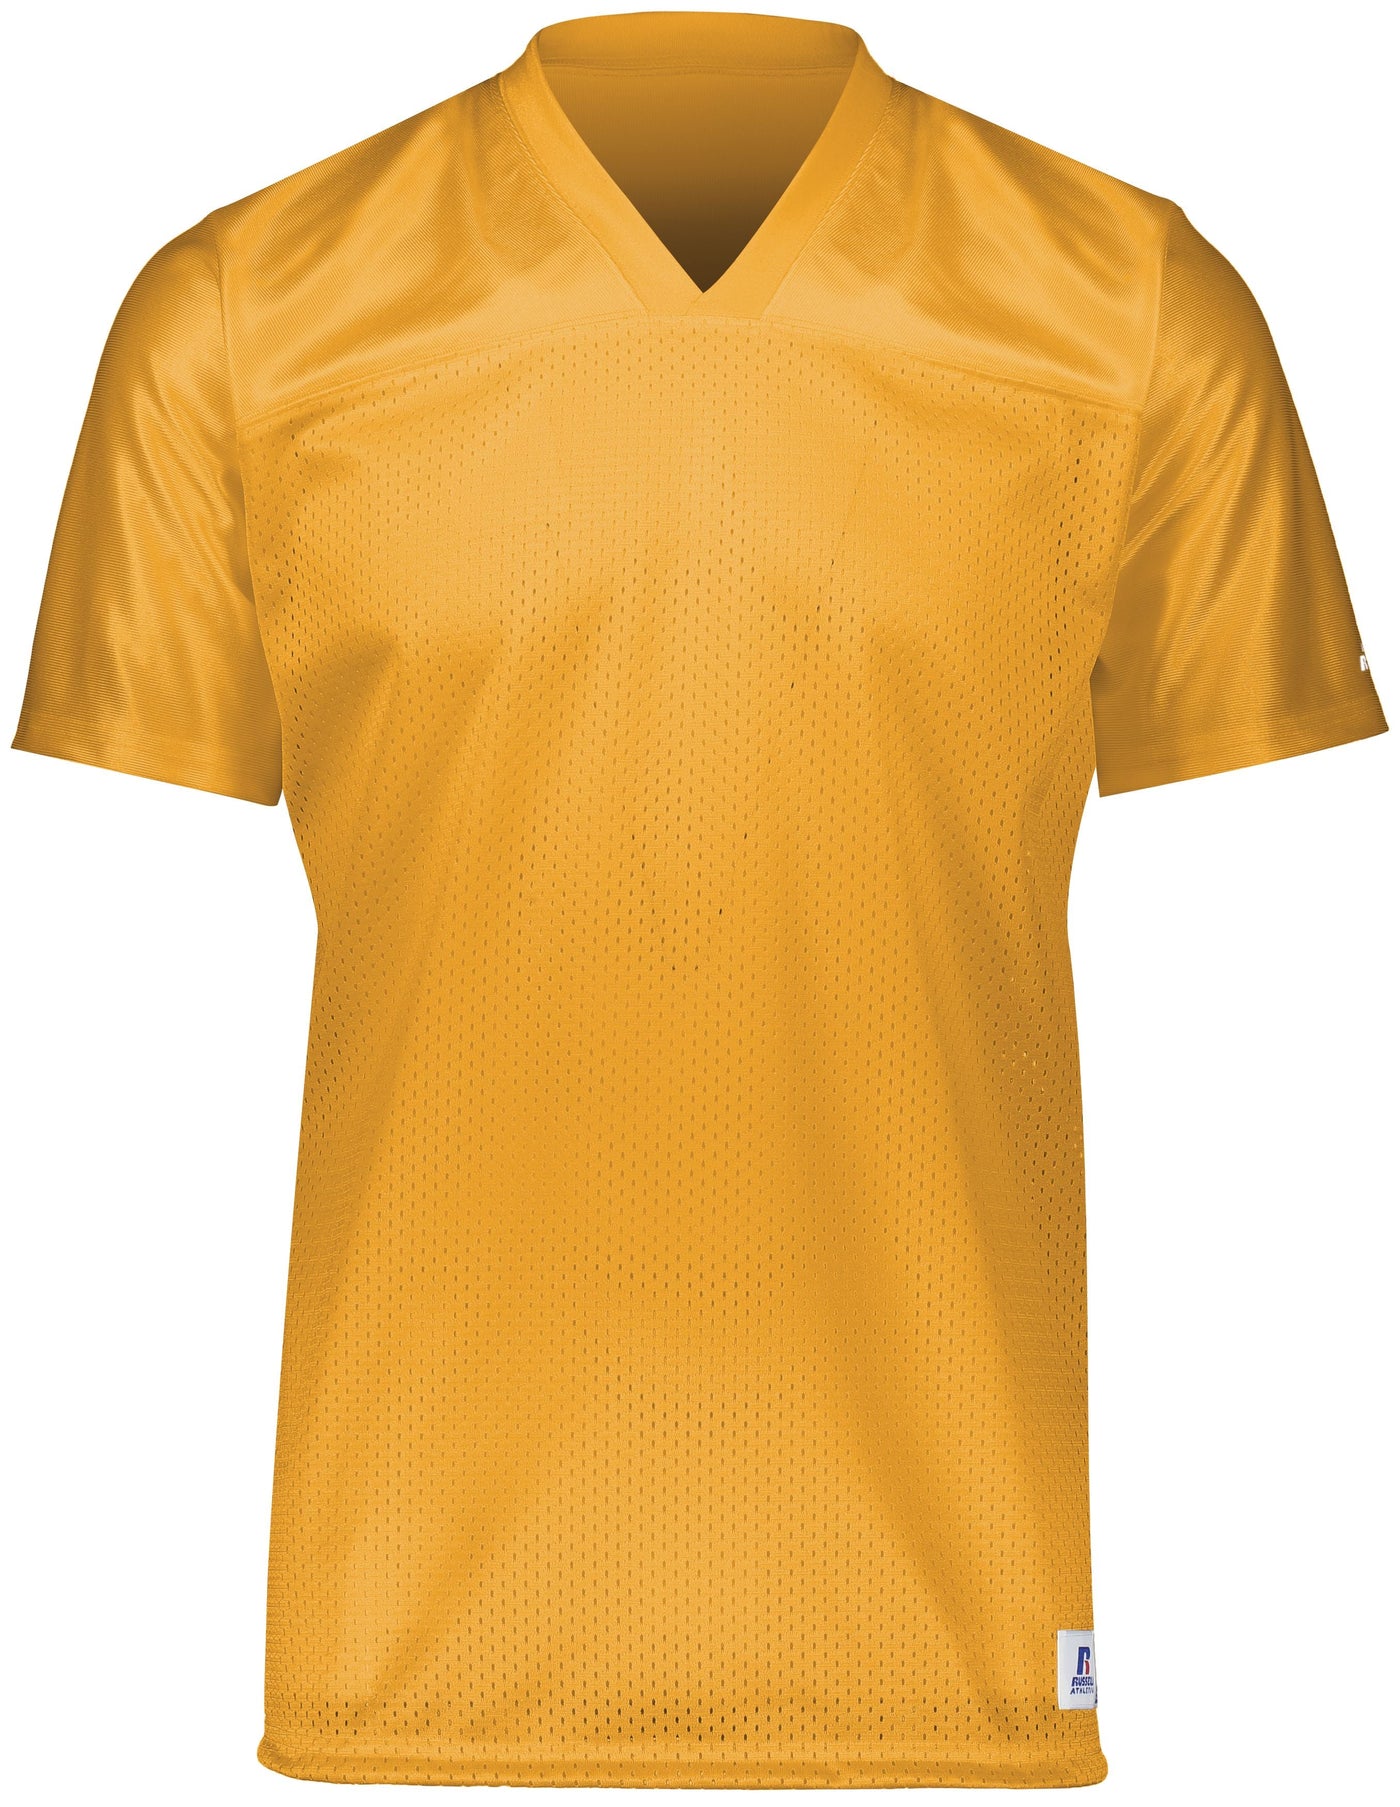 Solid Gold Flag Football Jersey